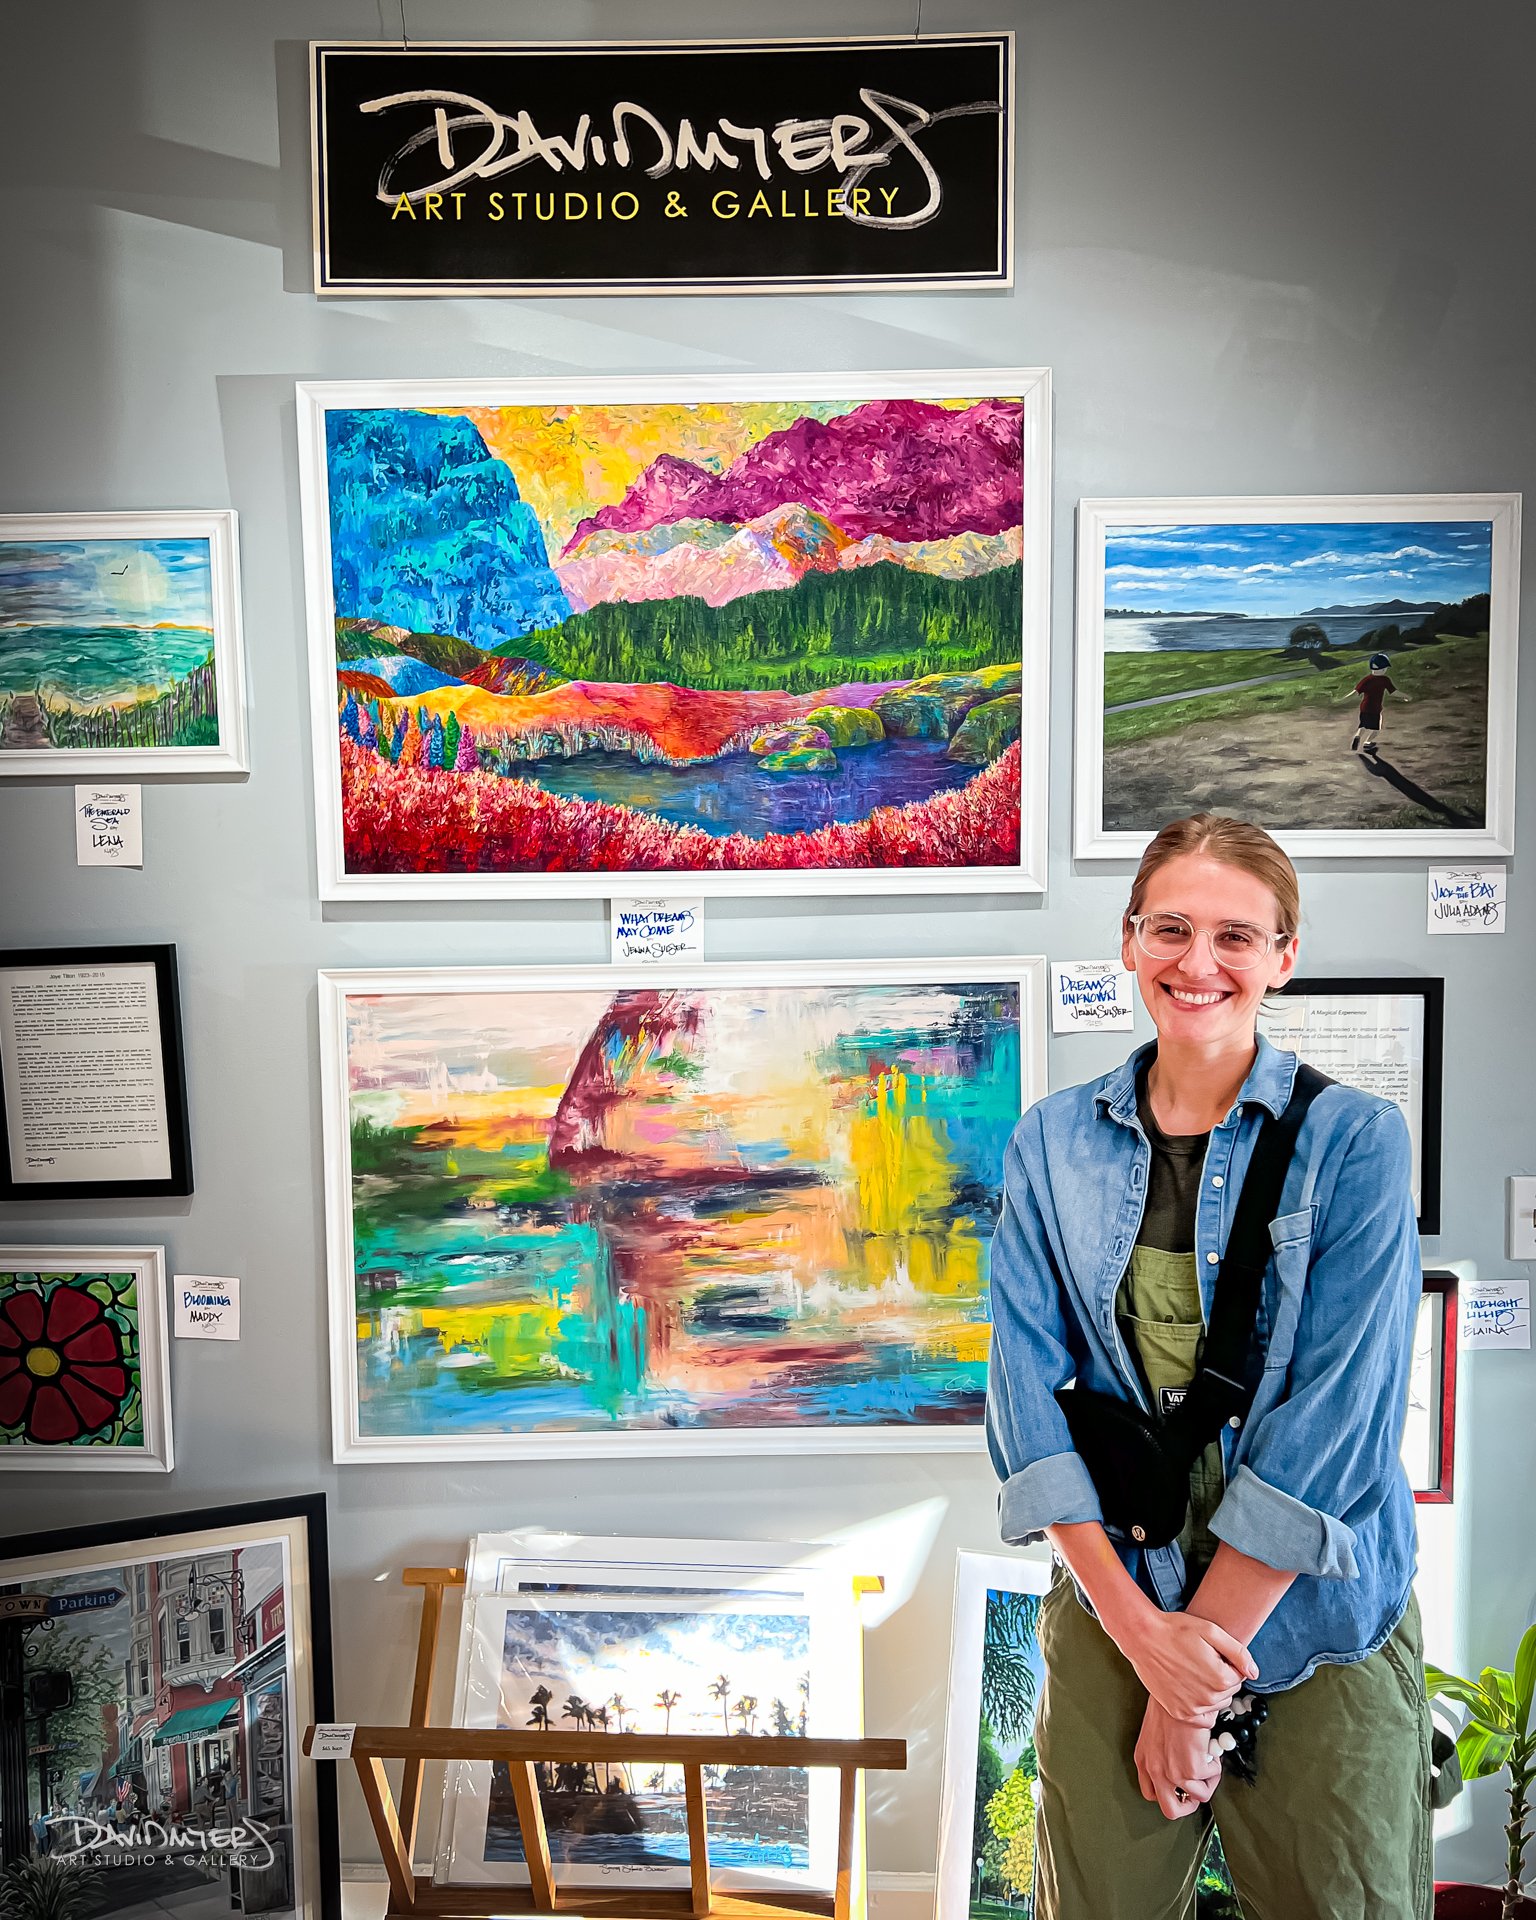 &quot;Don't let your dreams be dreams.&quot; -Jack Johnson

Studio Artist Jenna Sulser with her two new original paintings, &ldquo;What Dreams may Come&rdquo; and &ldquo;Dreams Unknown&rdquo;. Both are displayed at the gallery, available and ready to